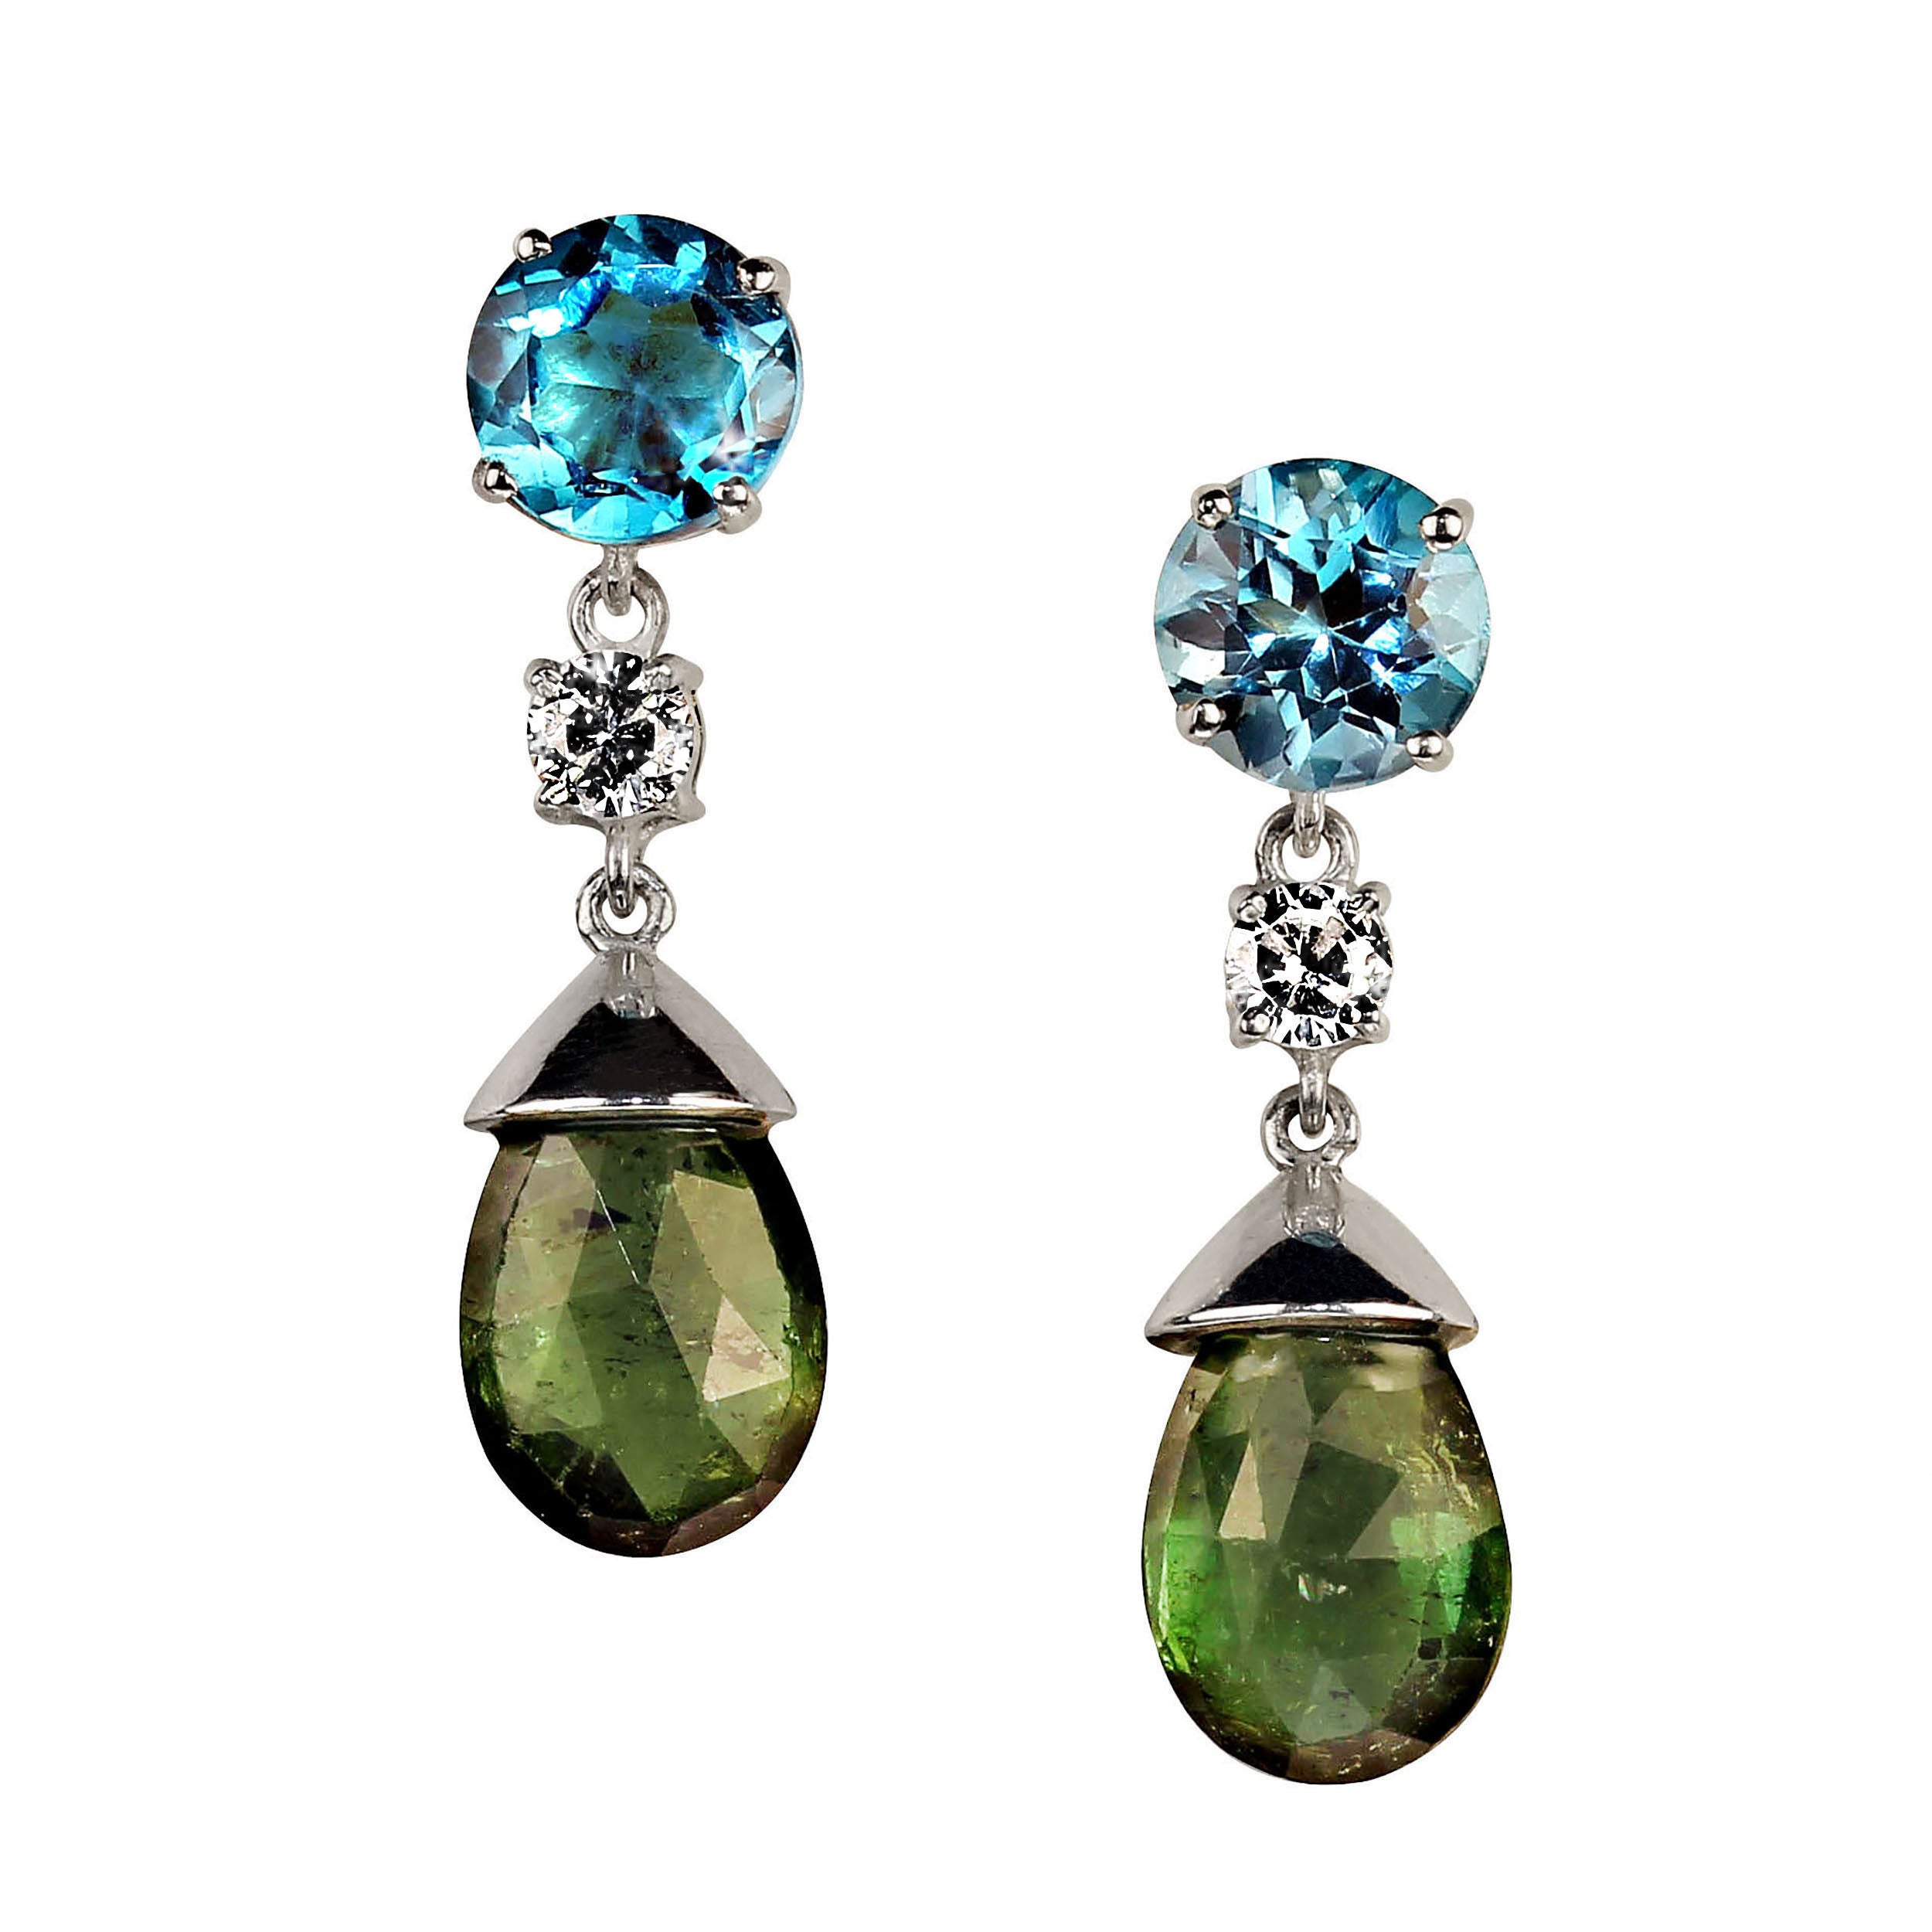 AJD Dangle Delight Earrings in Apatite and Green Tourmaline